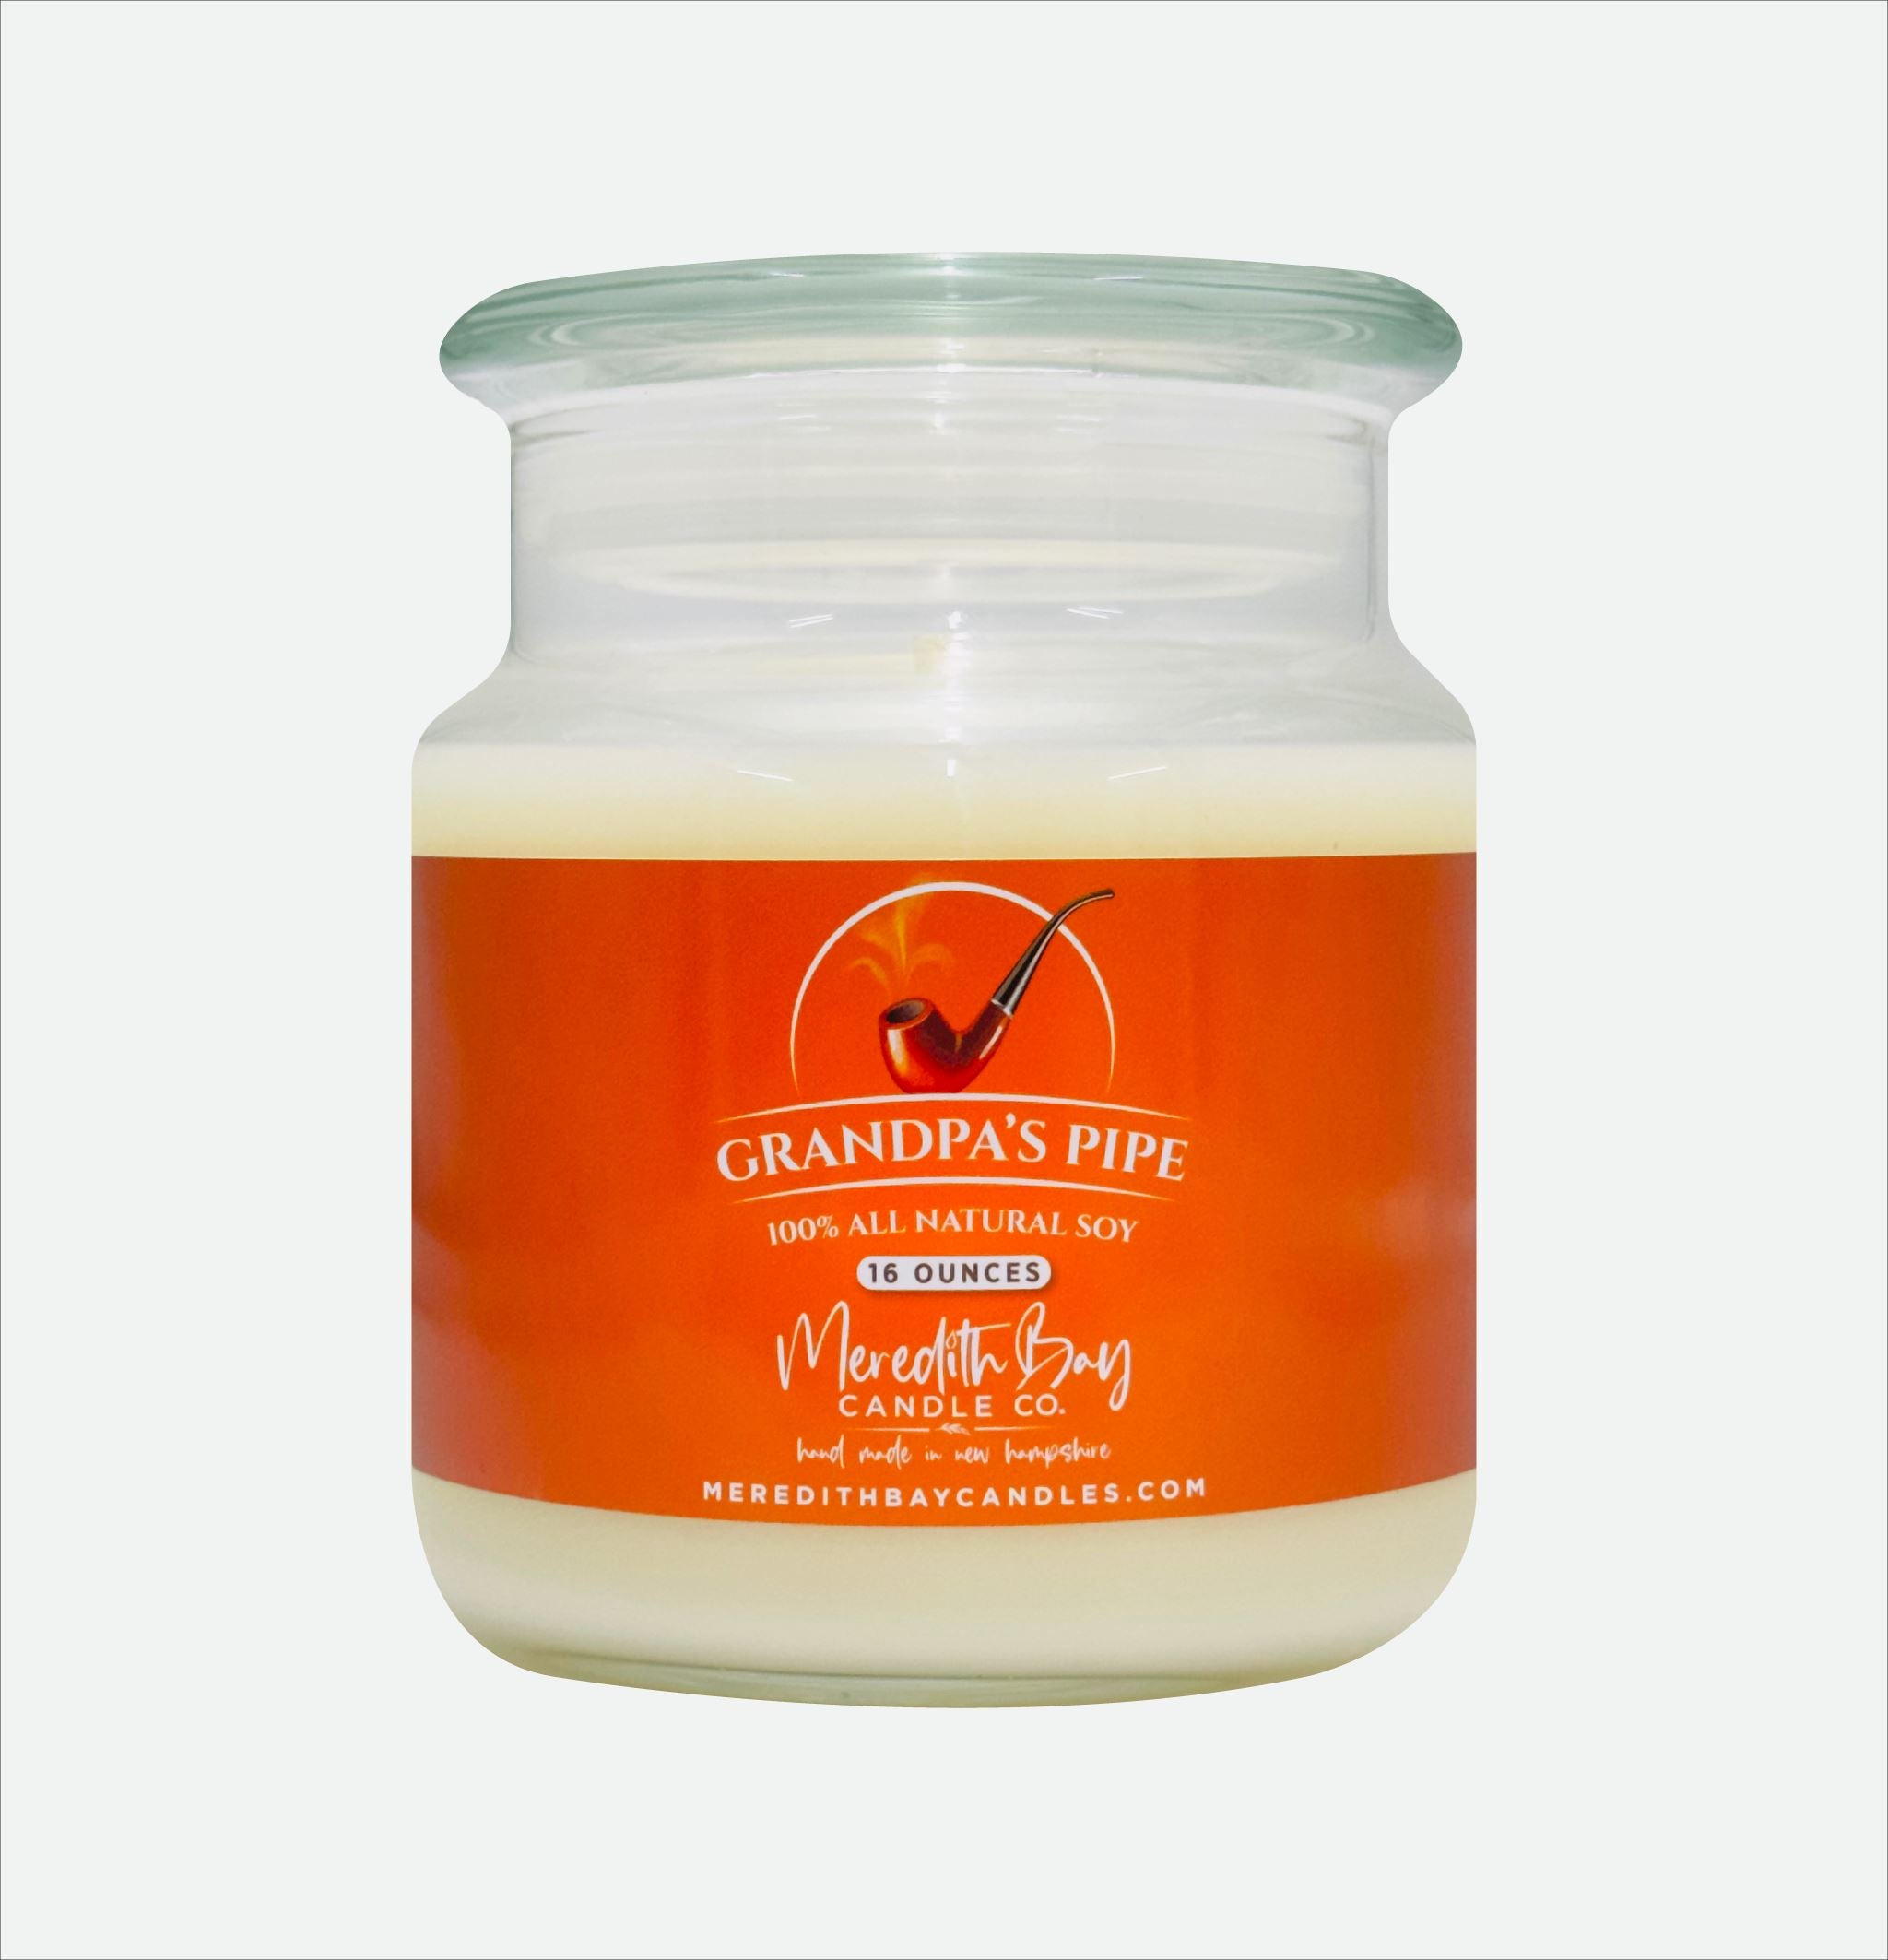 Grandpa's Pipe Soy Candle Meredith Bay Candle Co 16 Oz 